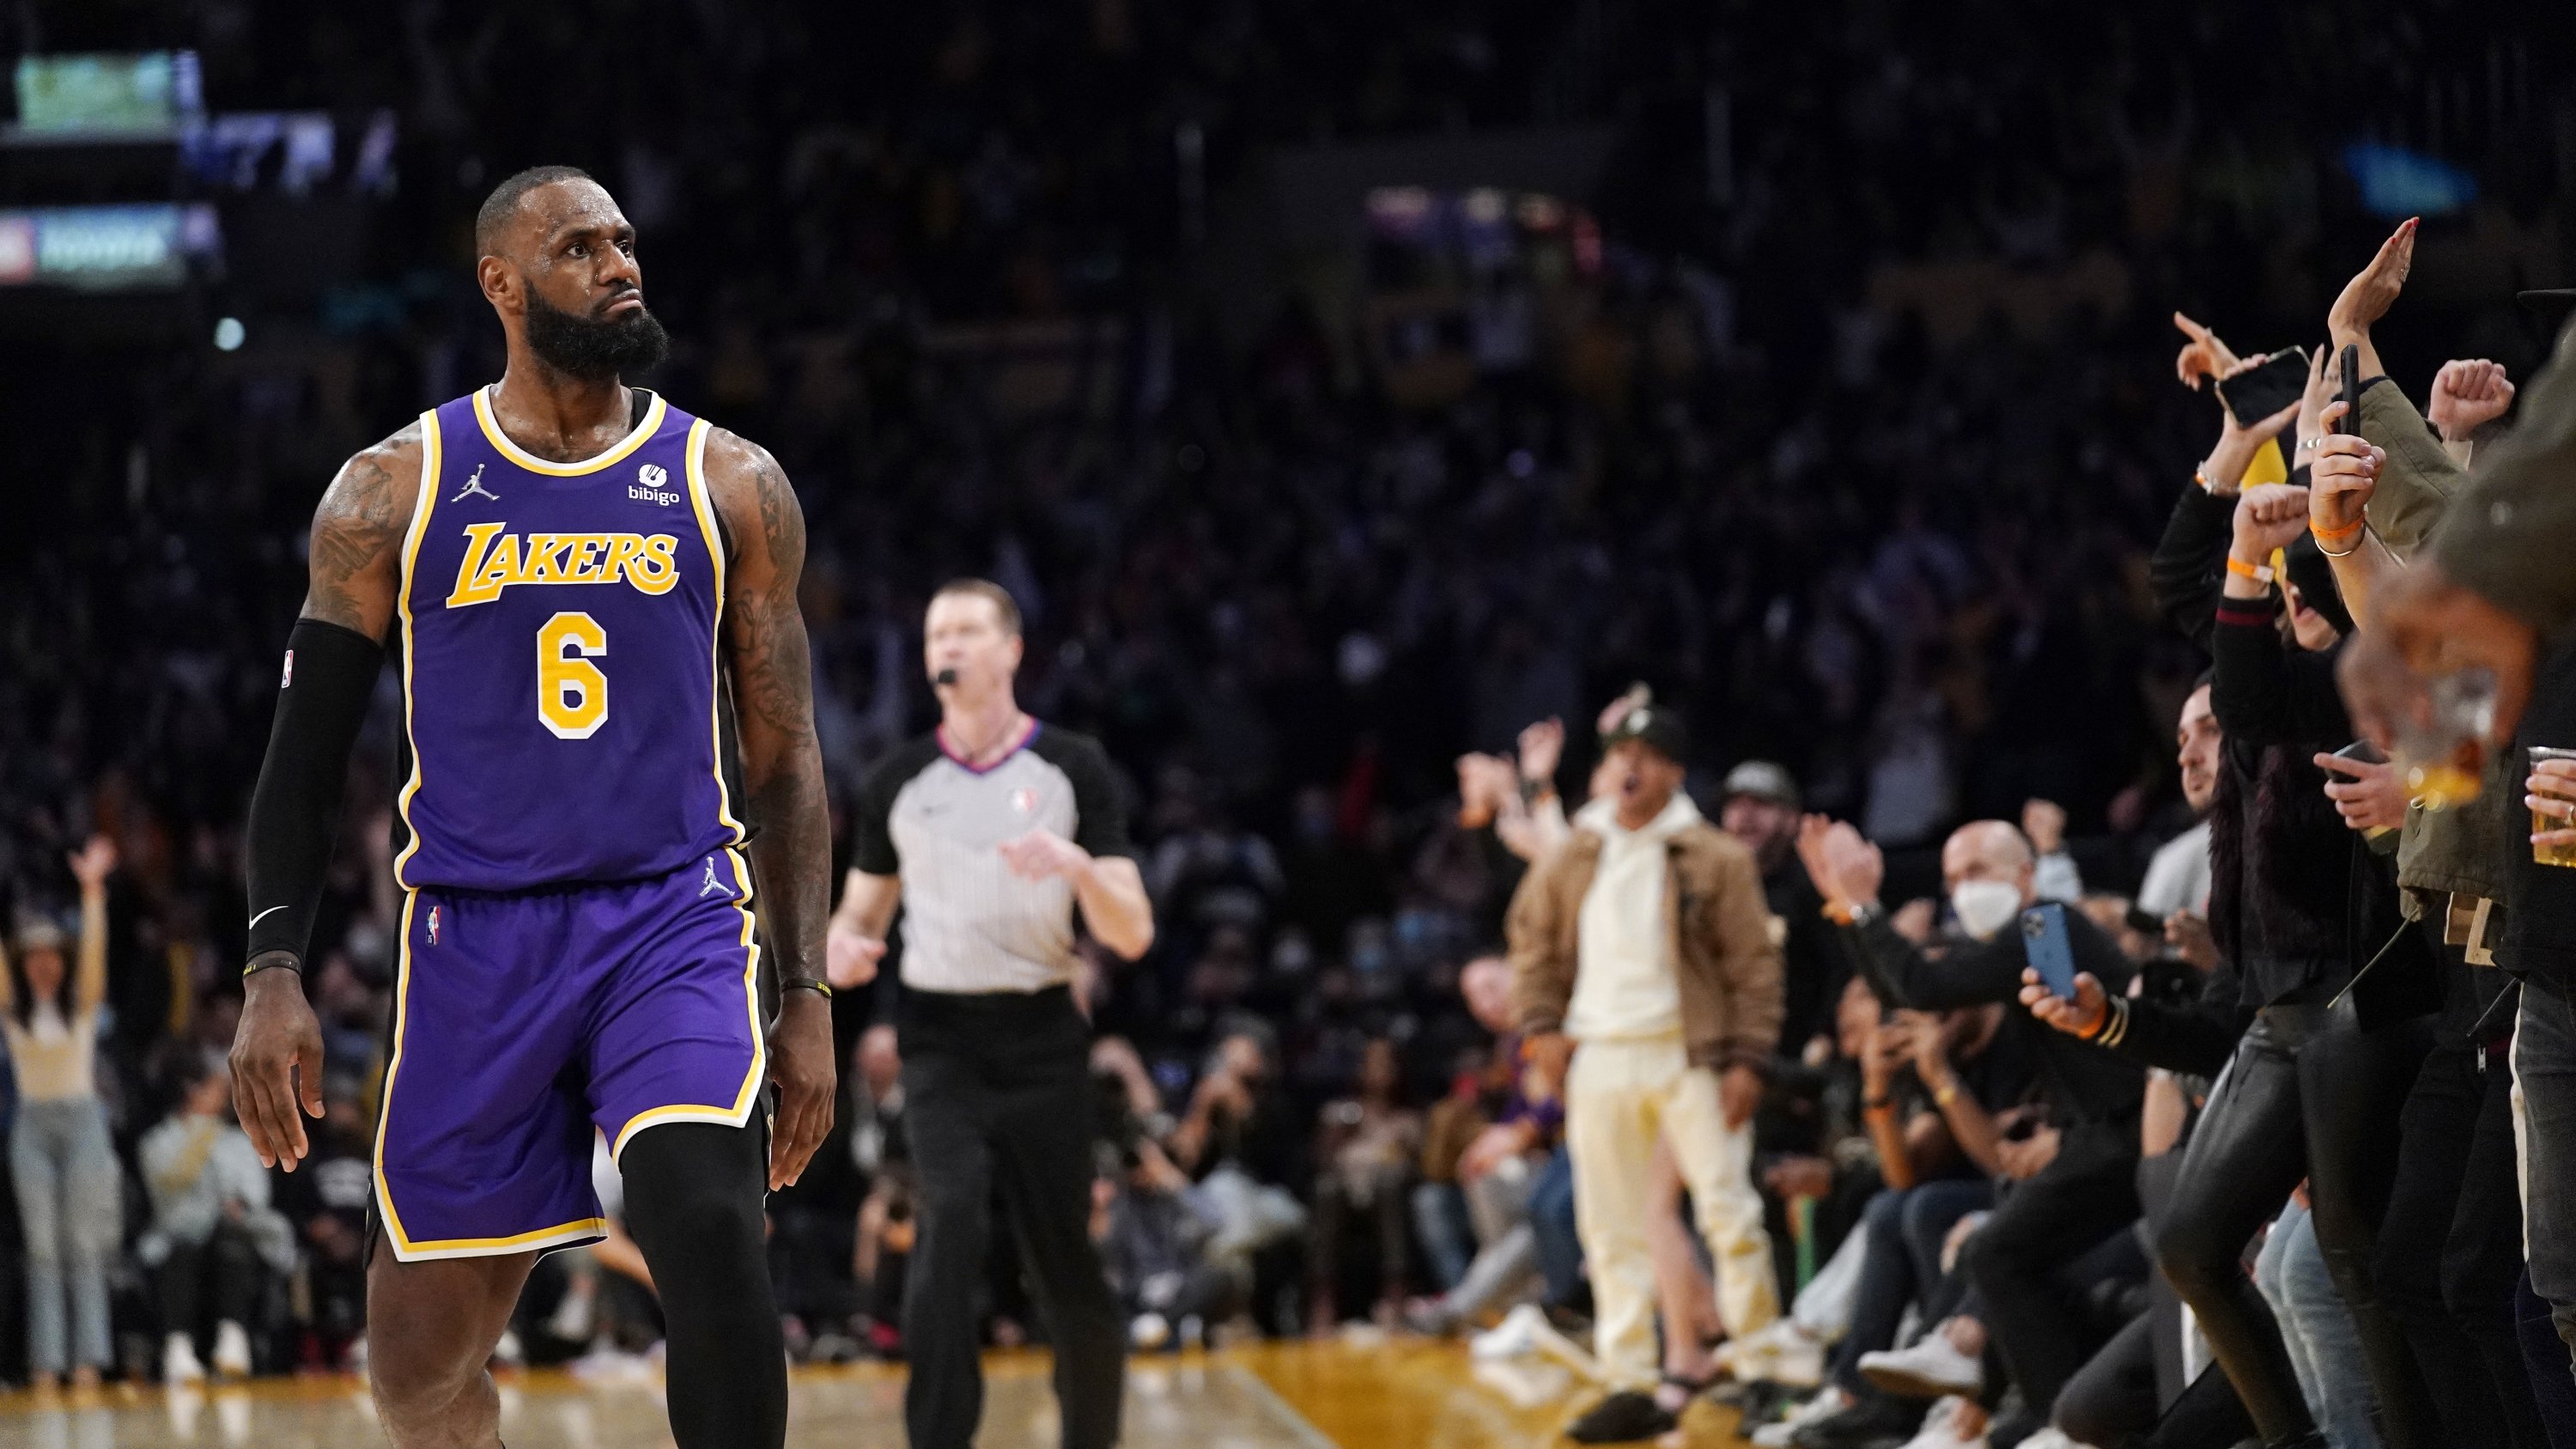 Is LeBron James playing tonight? Latest Lakers vs Warriors update